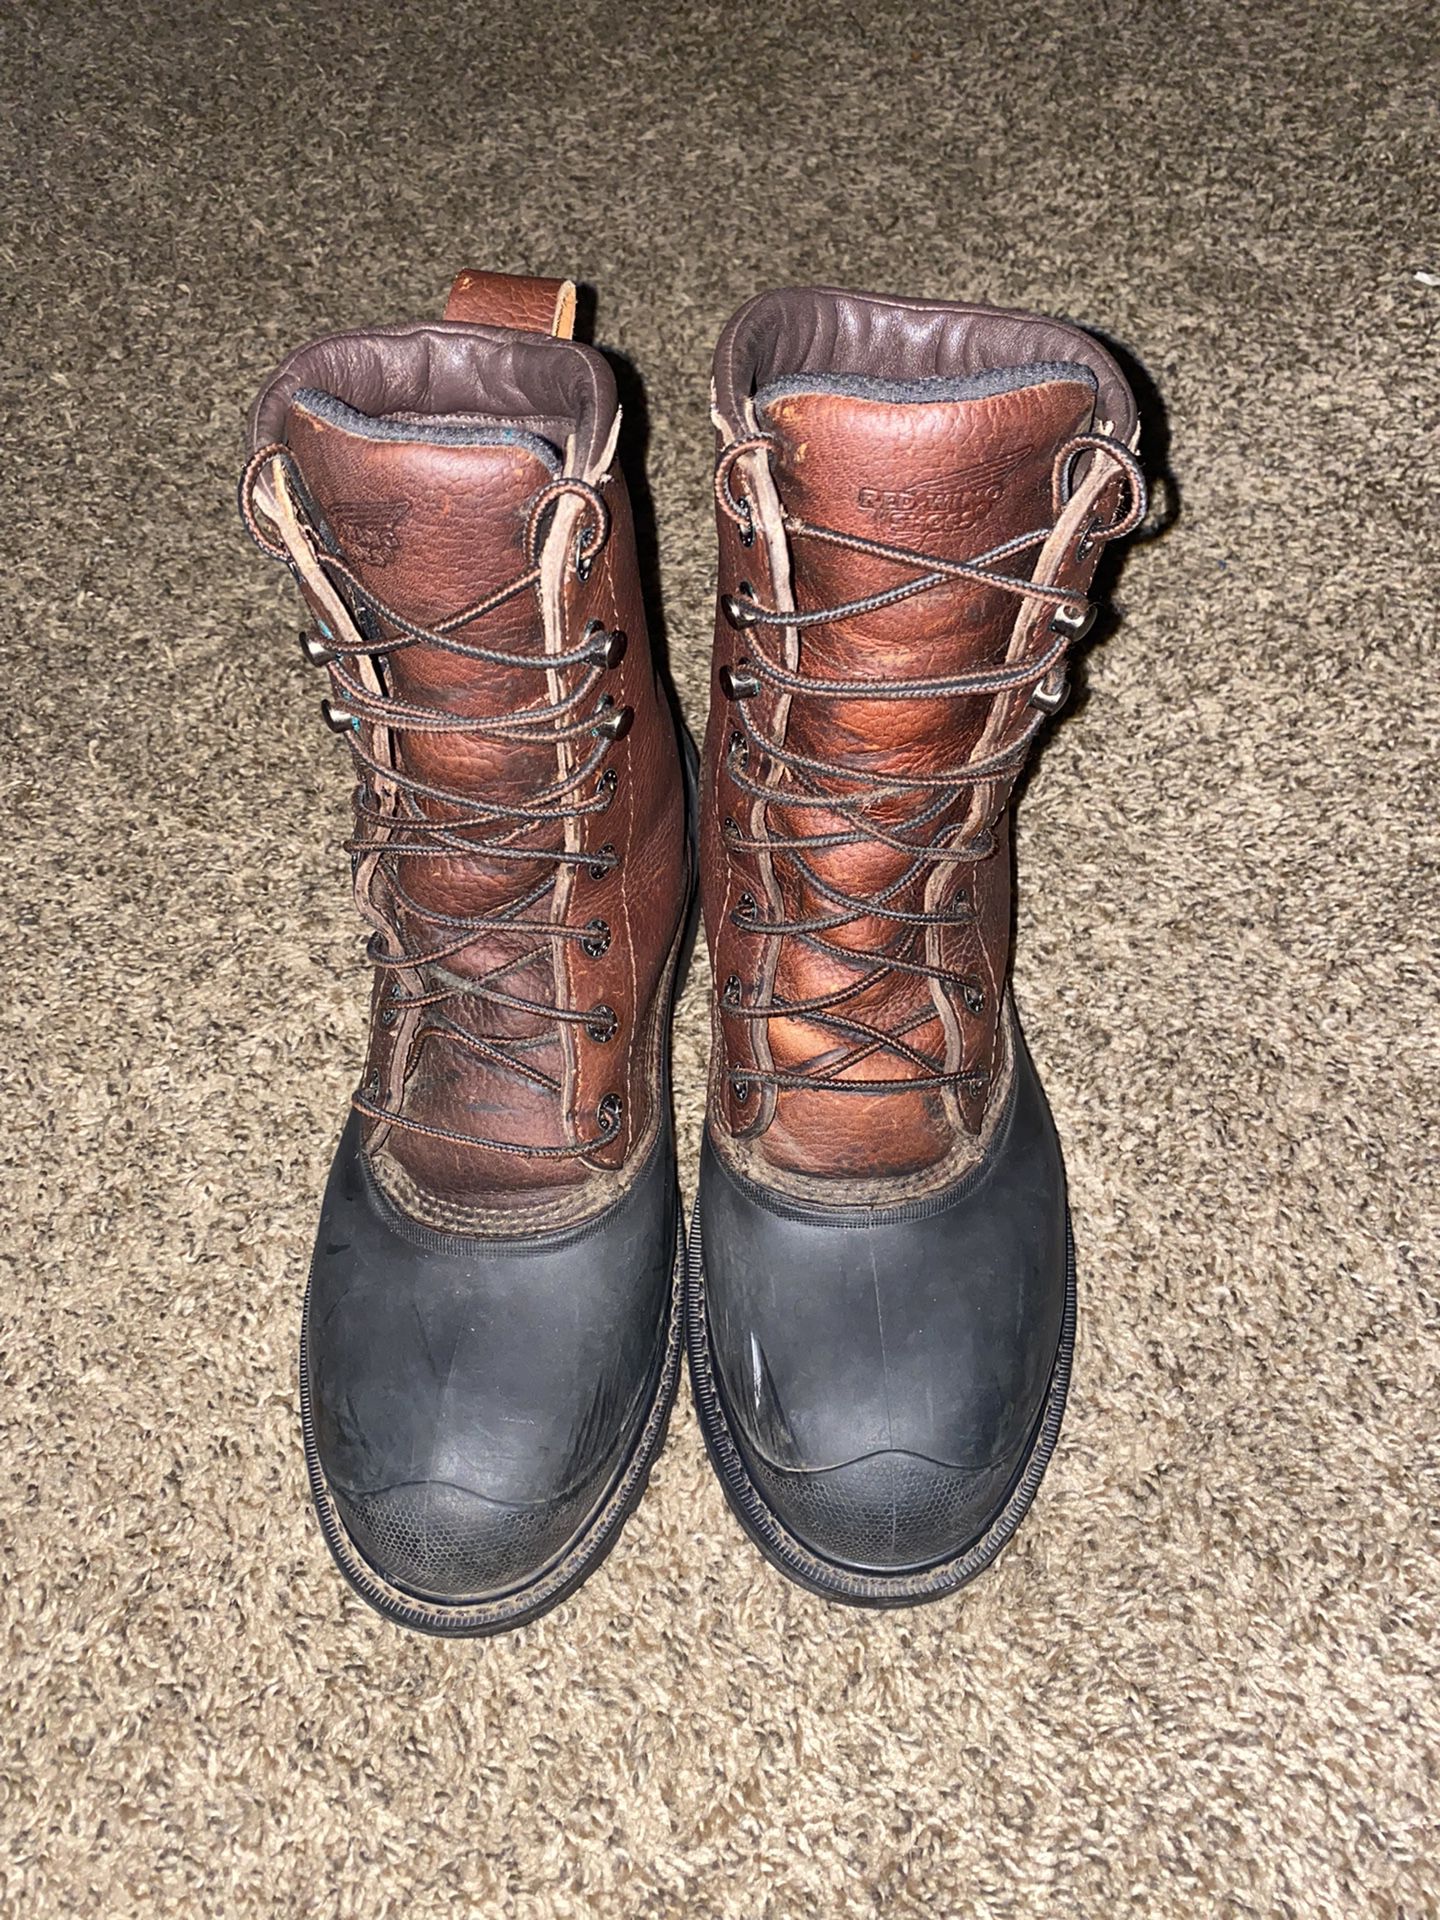 red wing boots 8.5 used Work Boots Steel Toe Oil/slip resistance